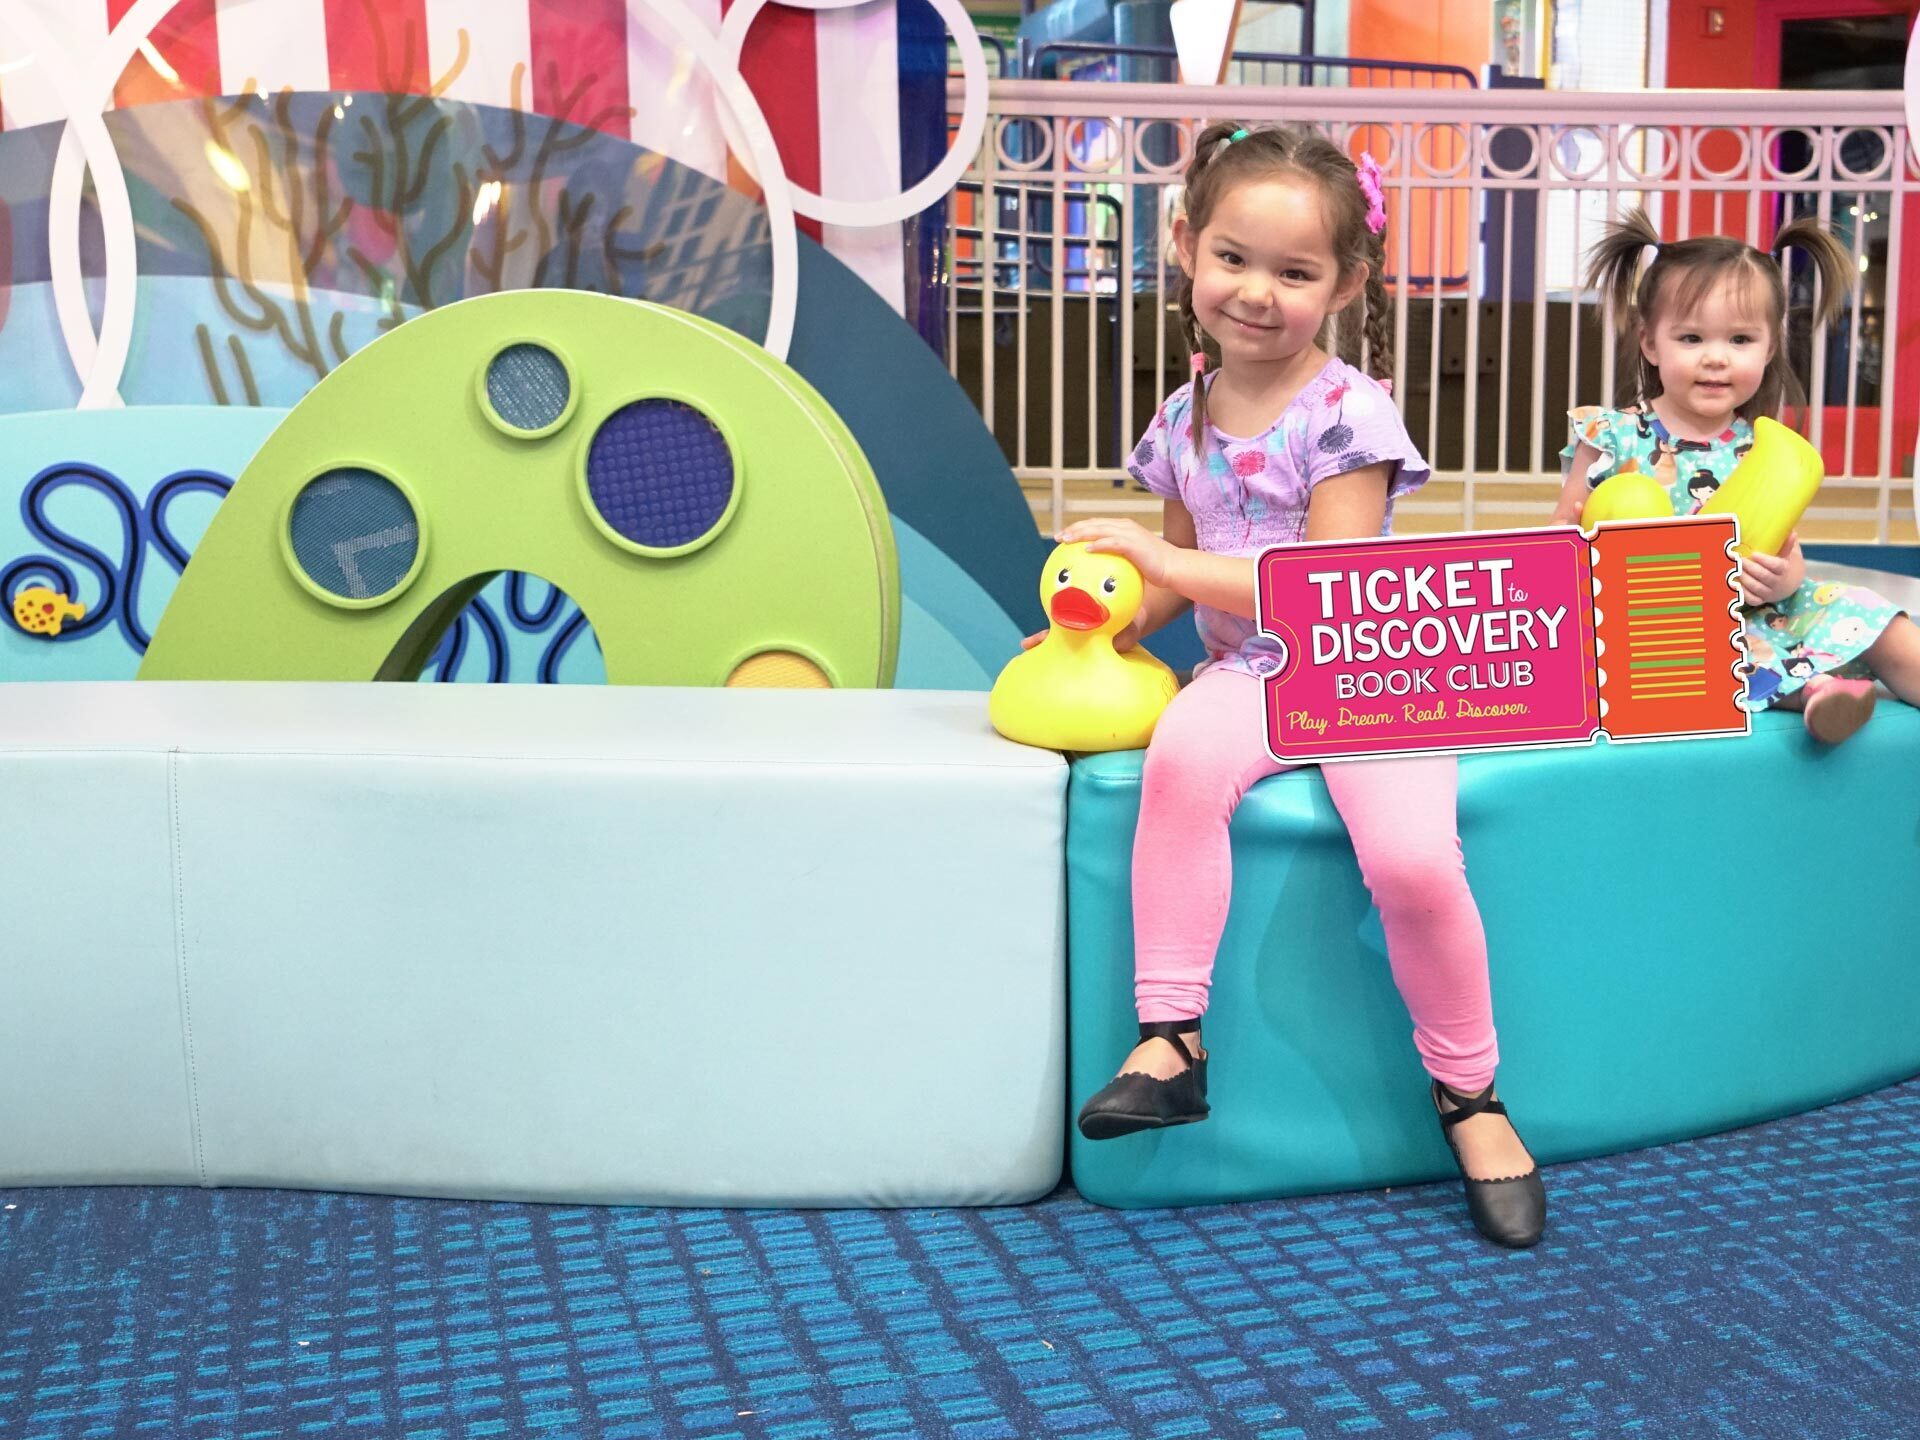 Tickets to Discovery - two young girls with a large colorful ticket in the Port Discovery children's museum